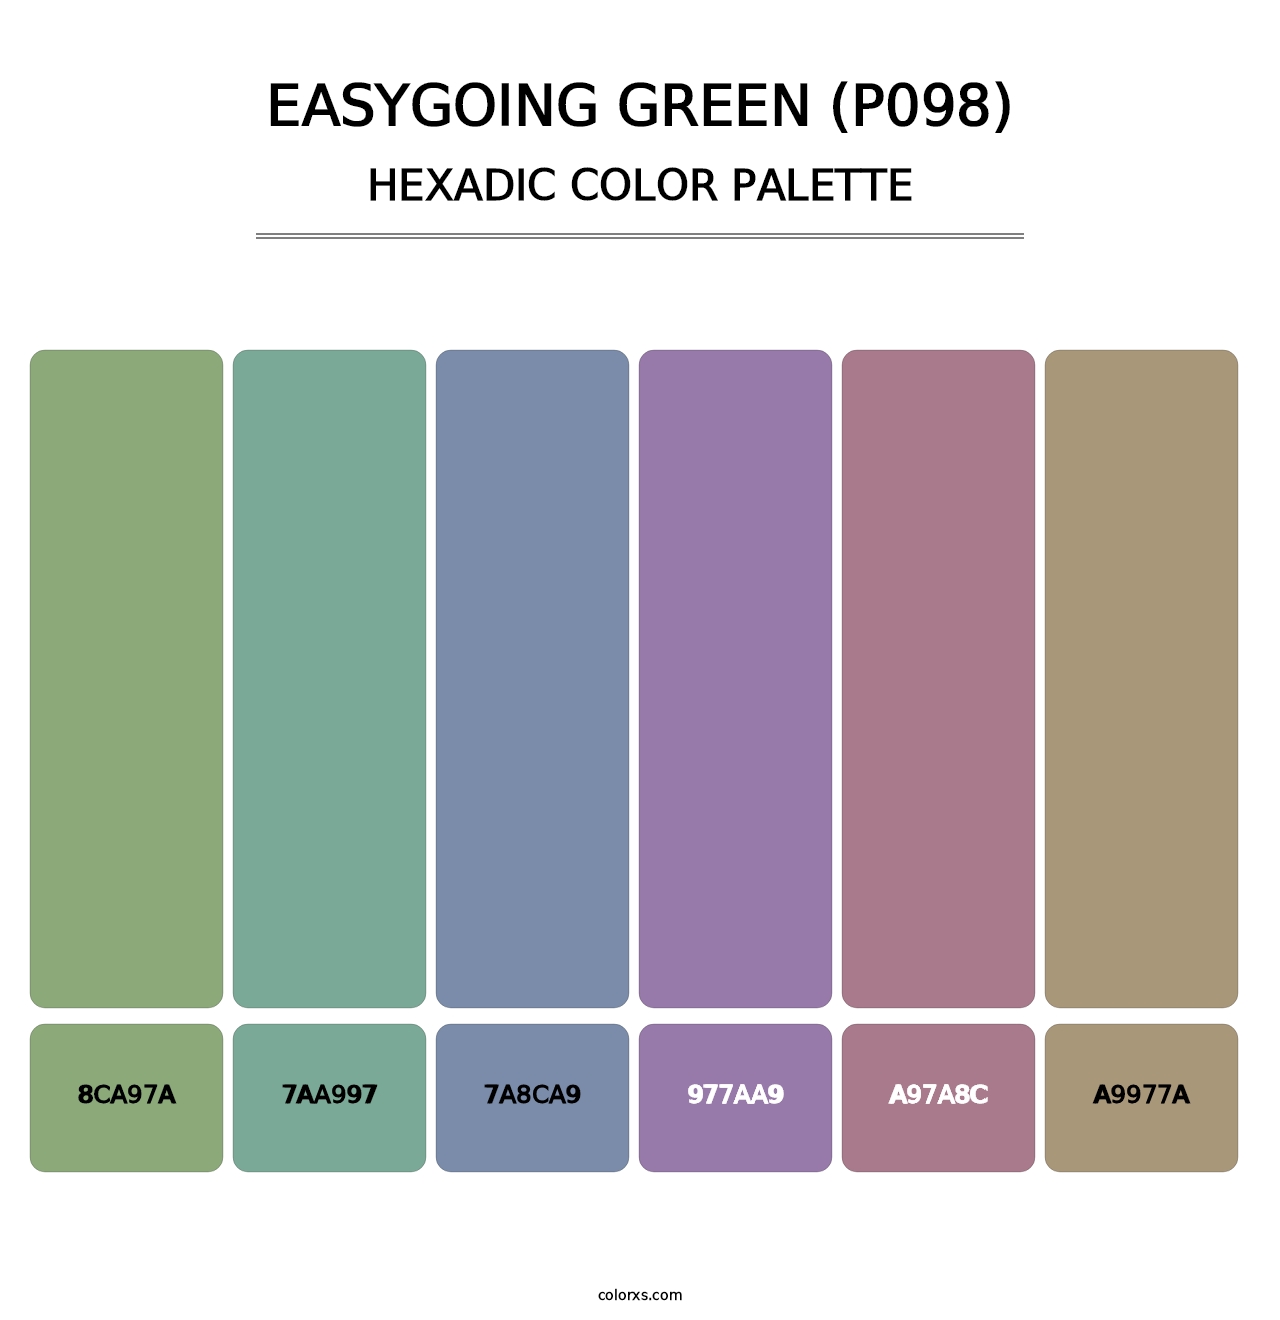 Easygoing Green (P098) - Hexadic Color Palette